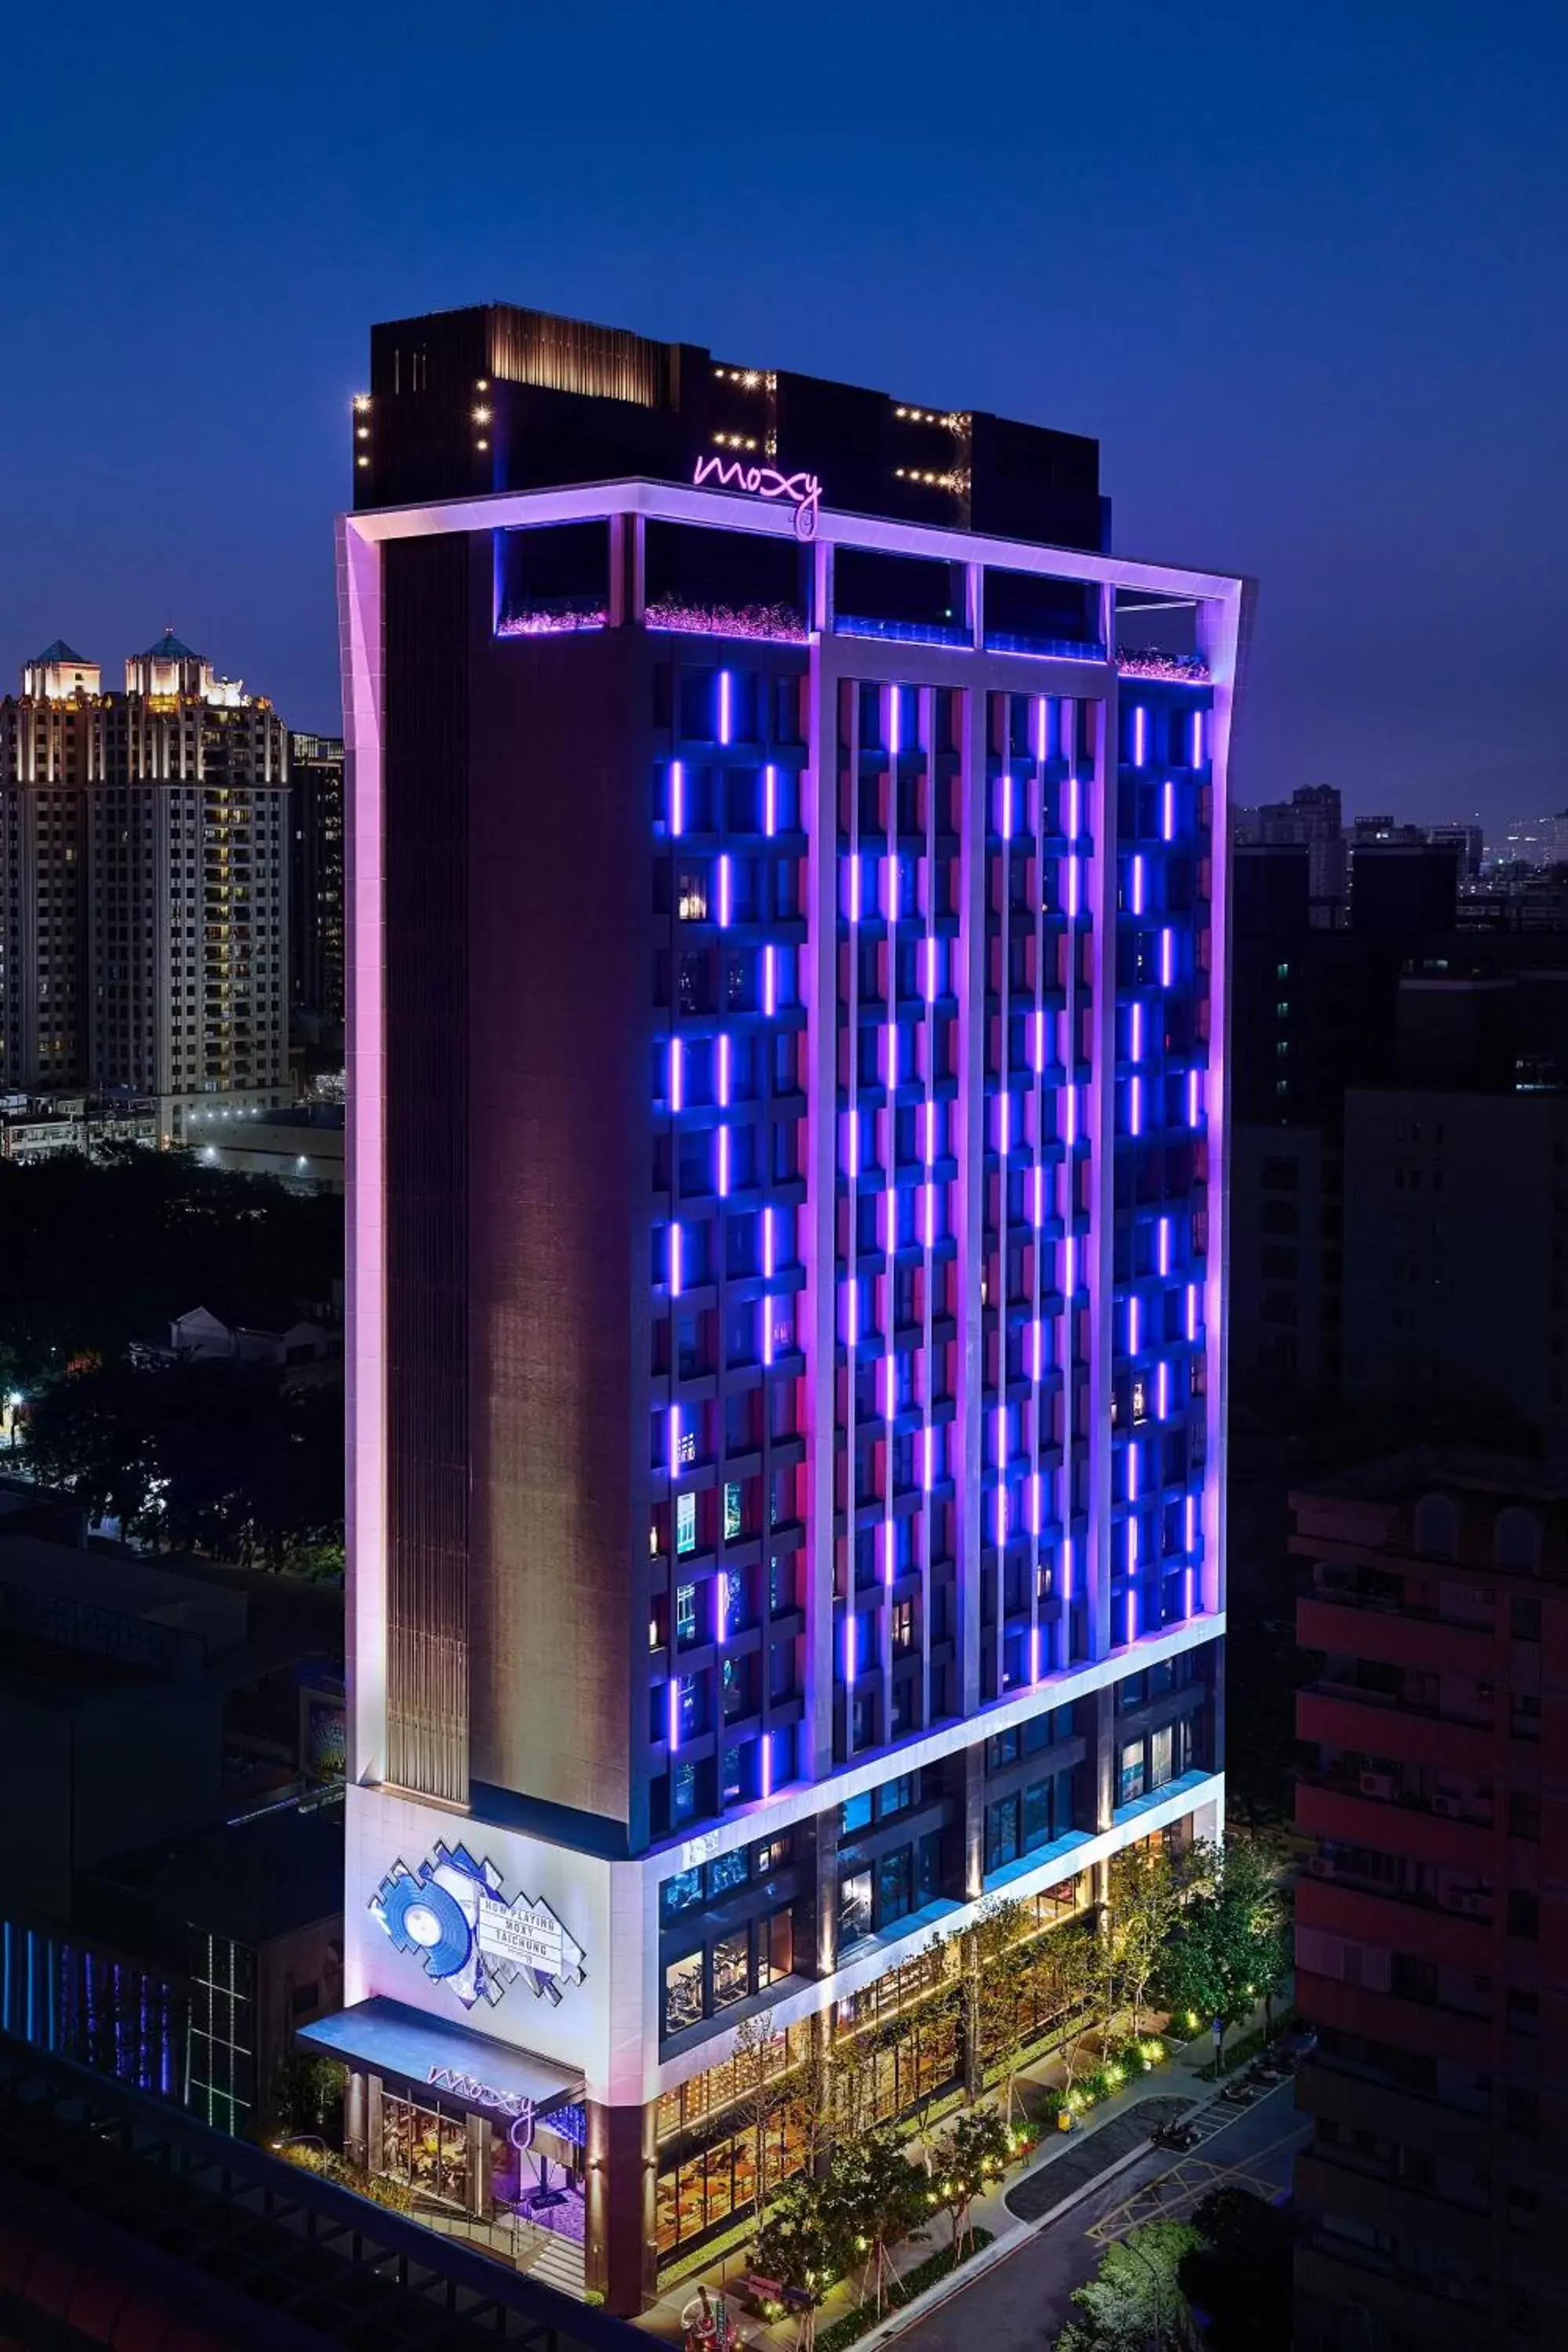 Property Building in Moxy Taichung